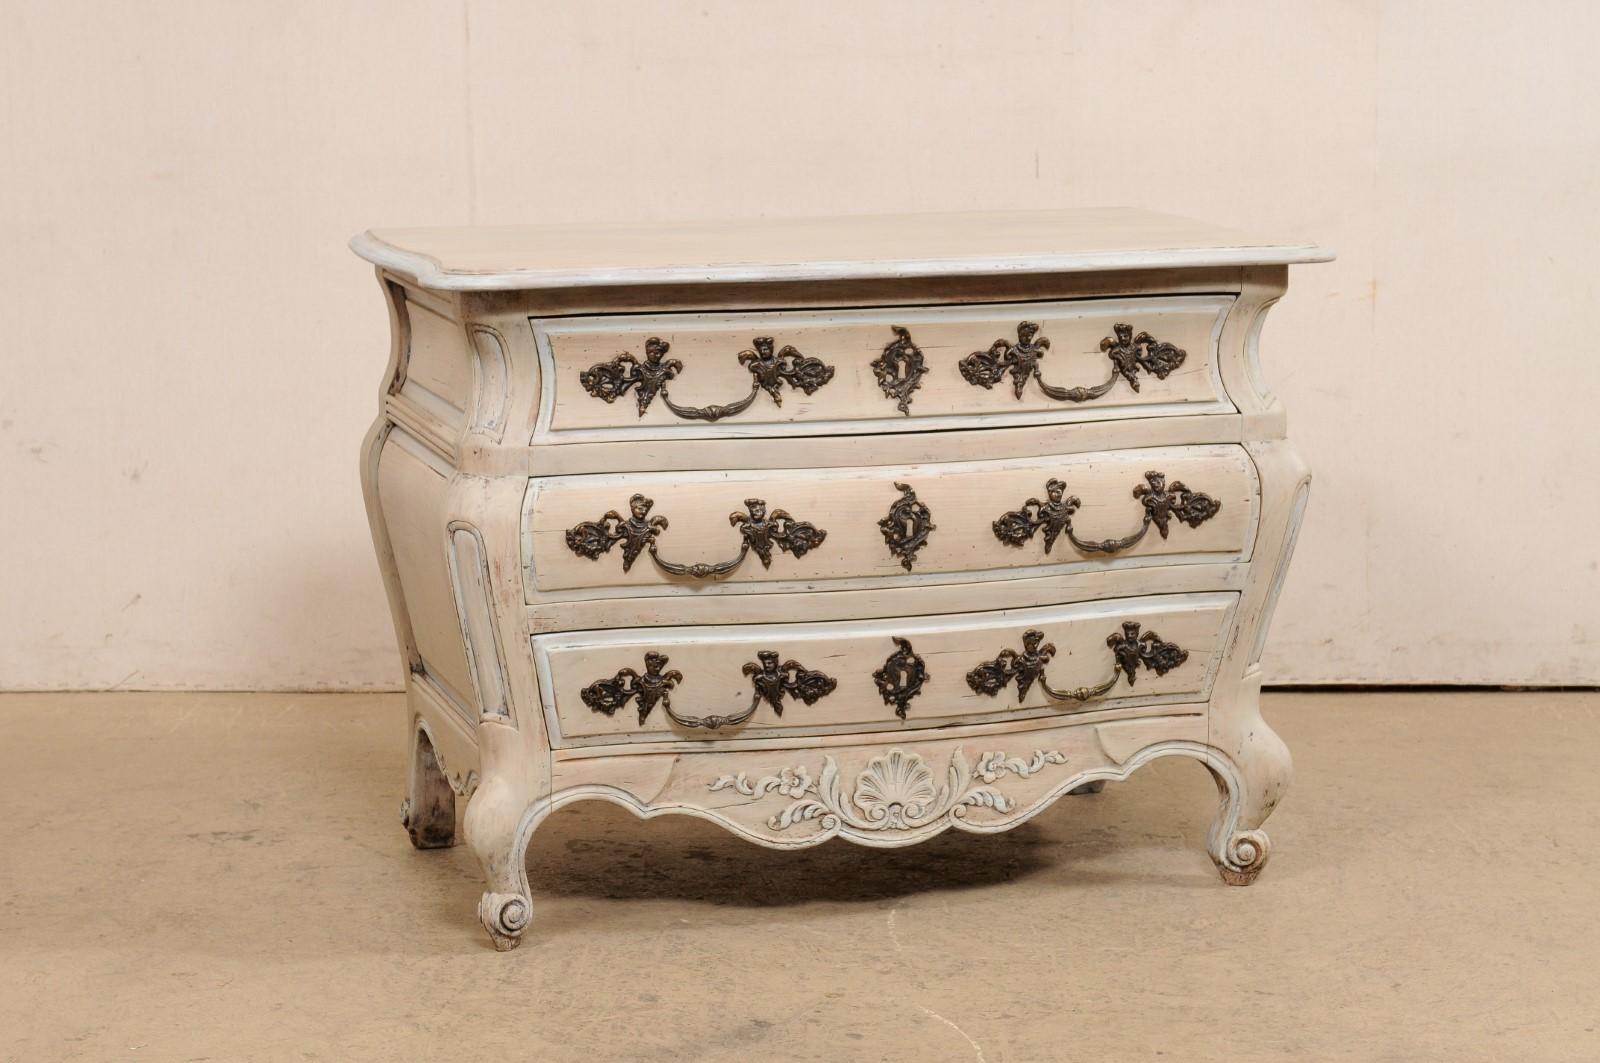 A French carved and painted-wood chest of three drawers. This vintage chest from France features a curvy bombé style case, scalloped skirt along three sides, decorative panel carvings down each front side post, and raised panel sides. The chest